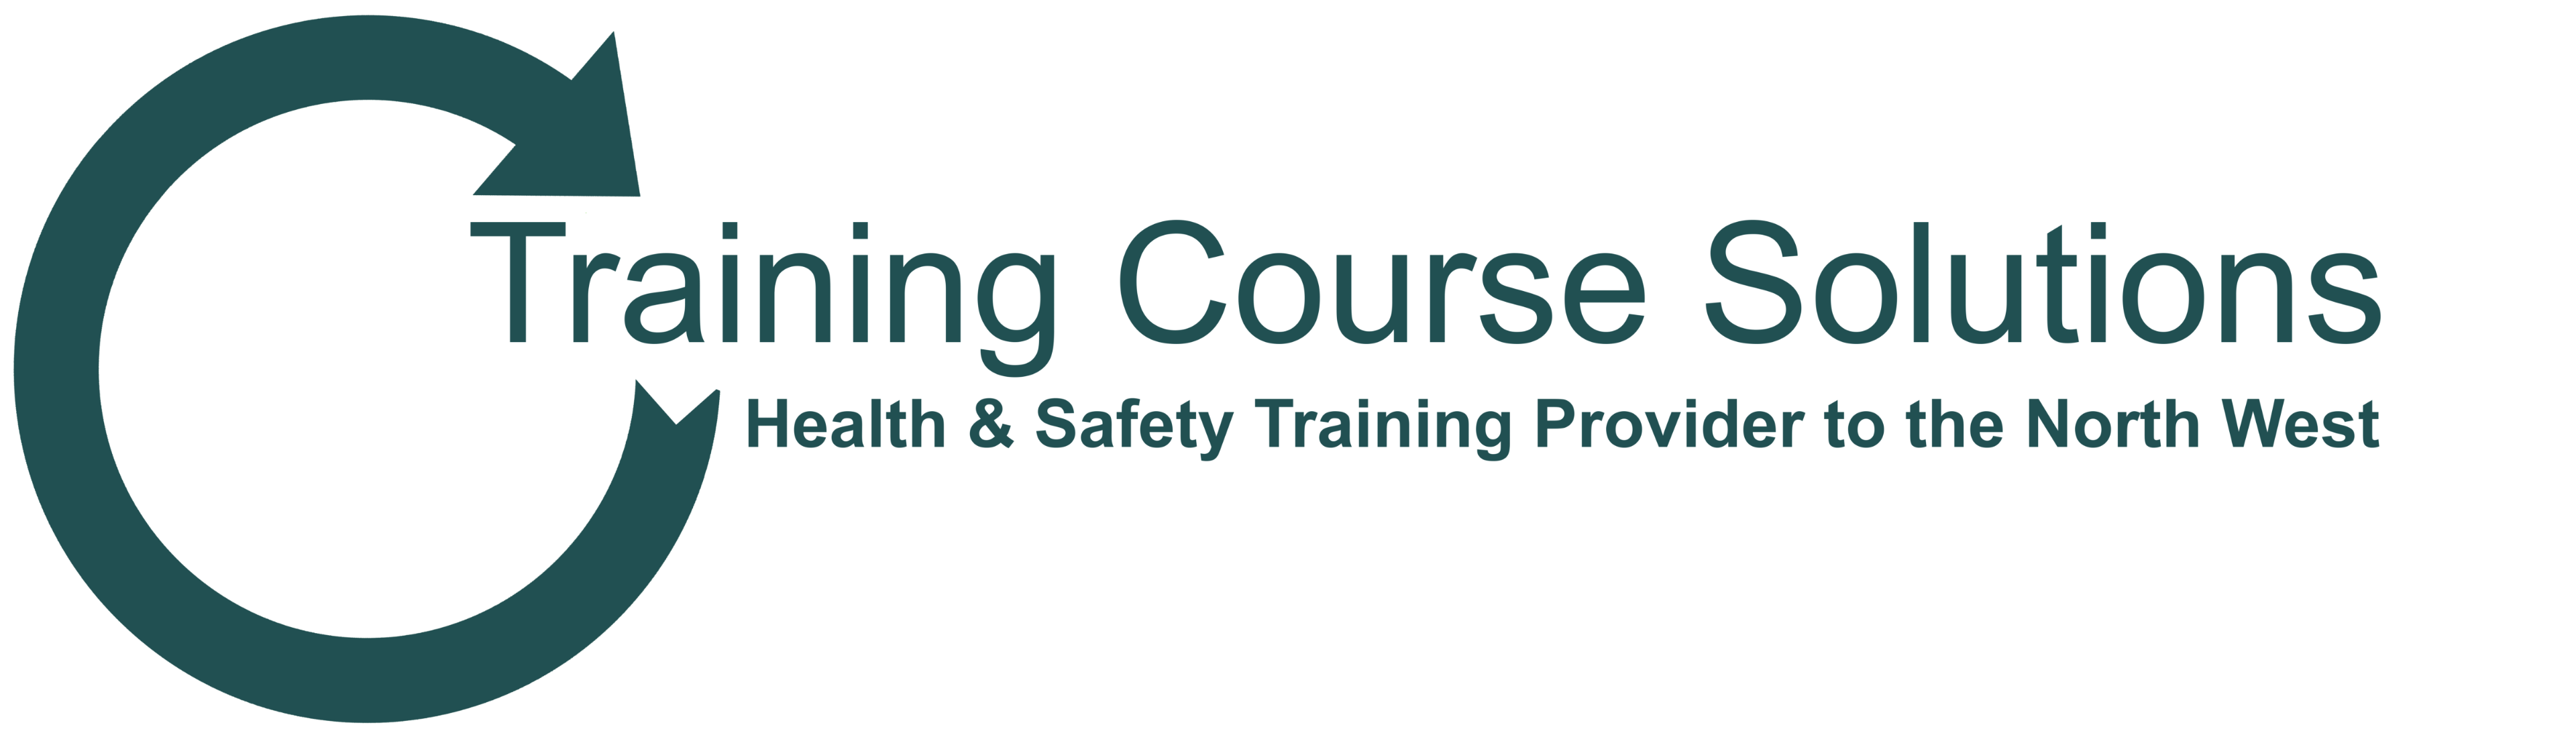 Training Course Solutions logo